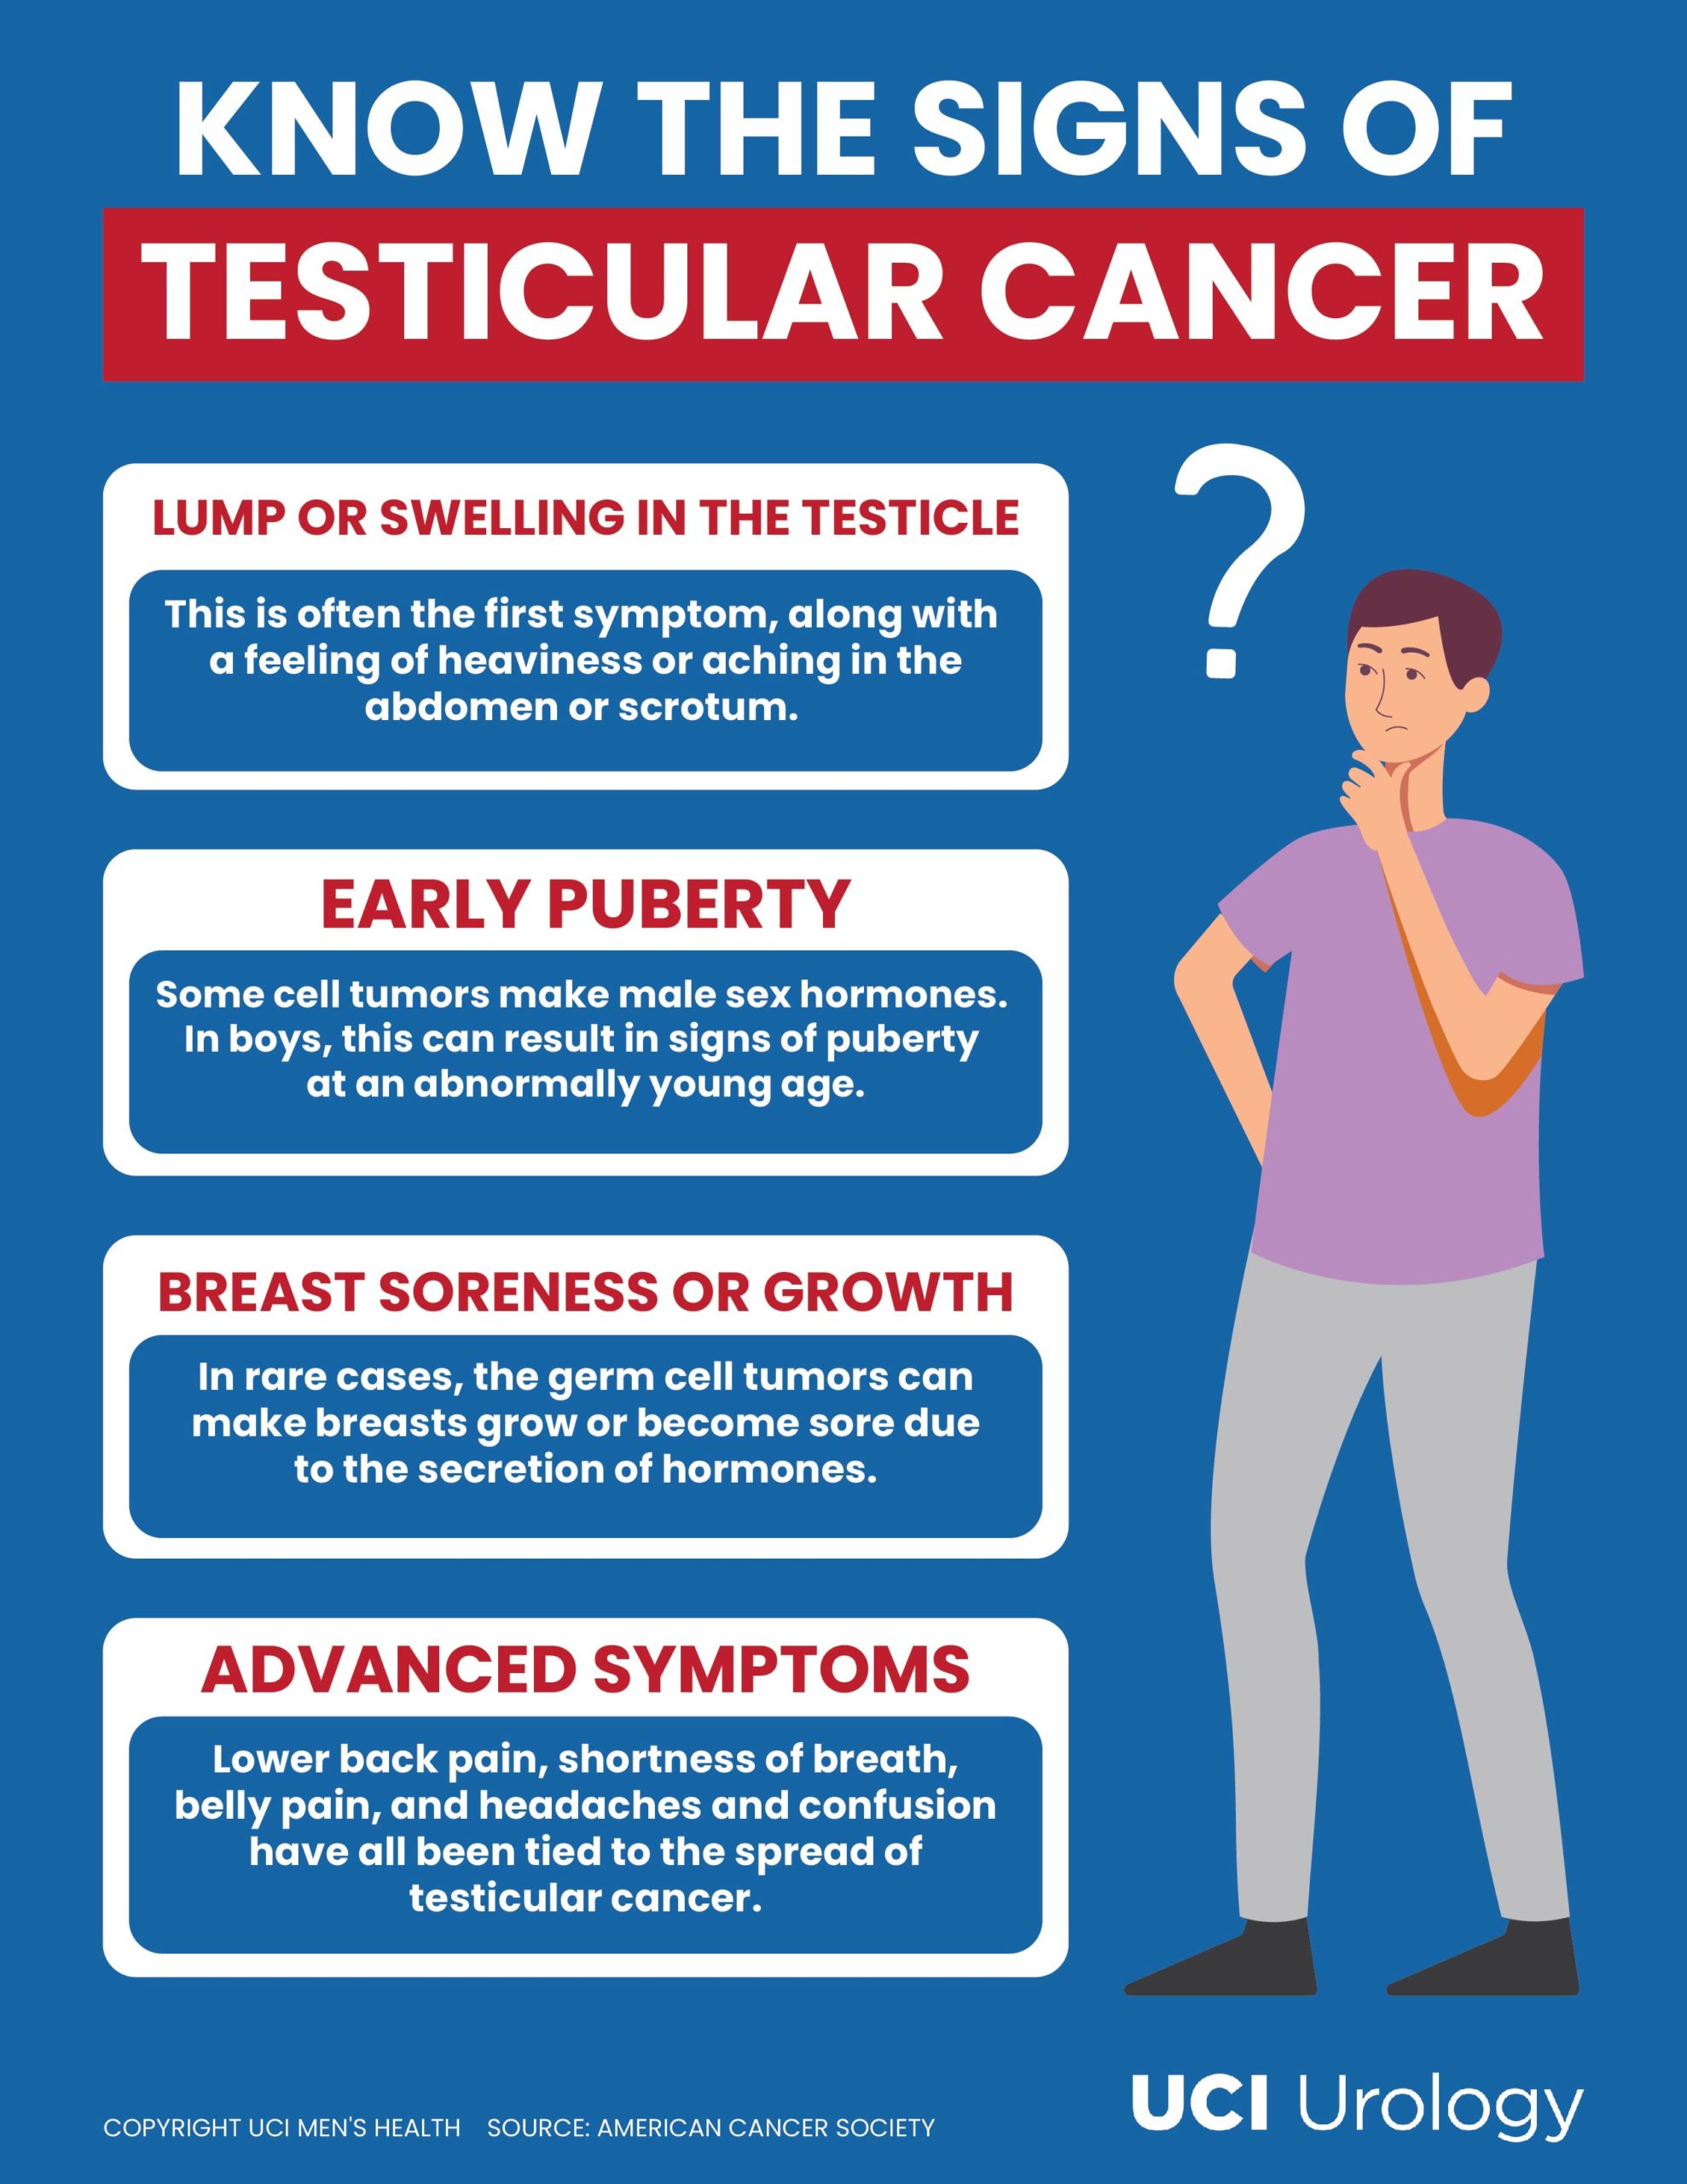 signs of testicular cancer - an infographic showing some of the potential signs of testicular cancer